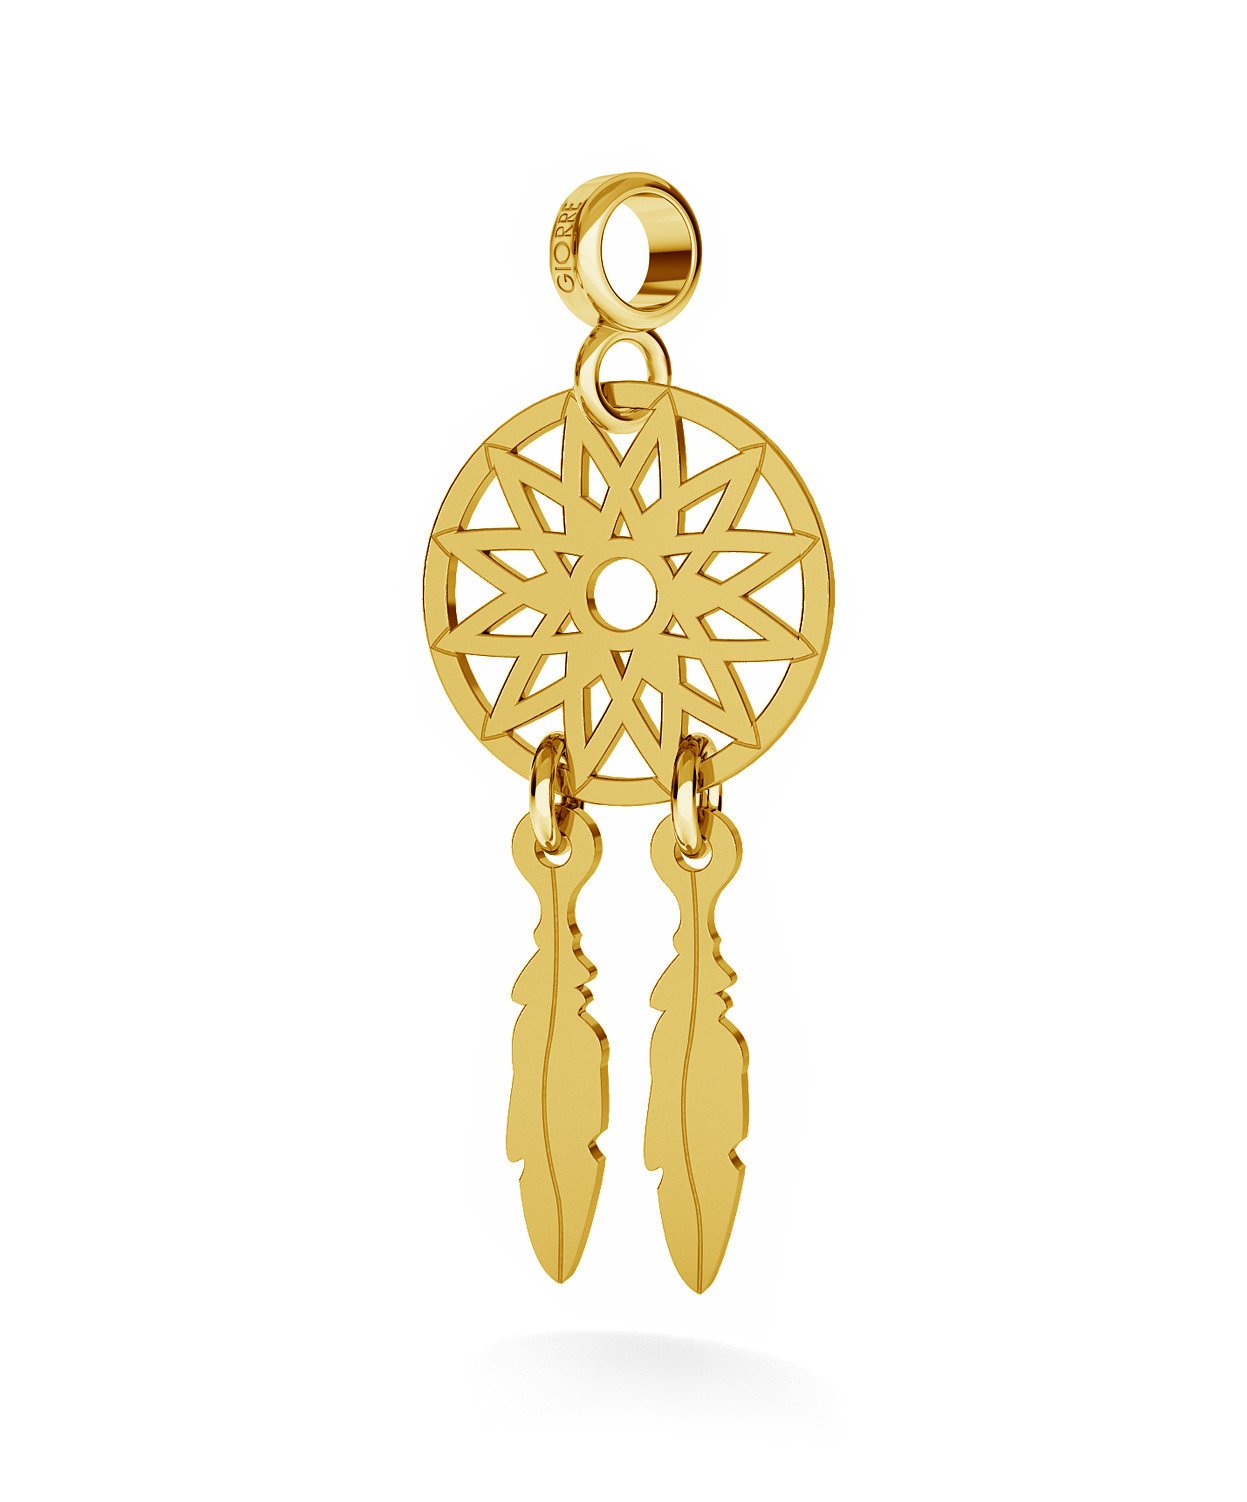 CHARM 110, DREAM CATCHER, STERLING SILVER (925) RHODIUM OR GOLD PLATED